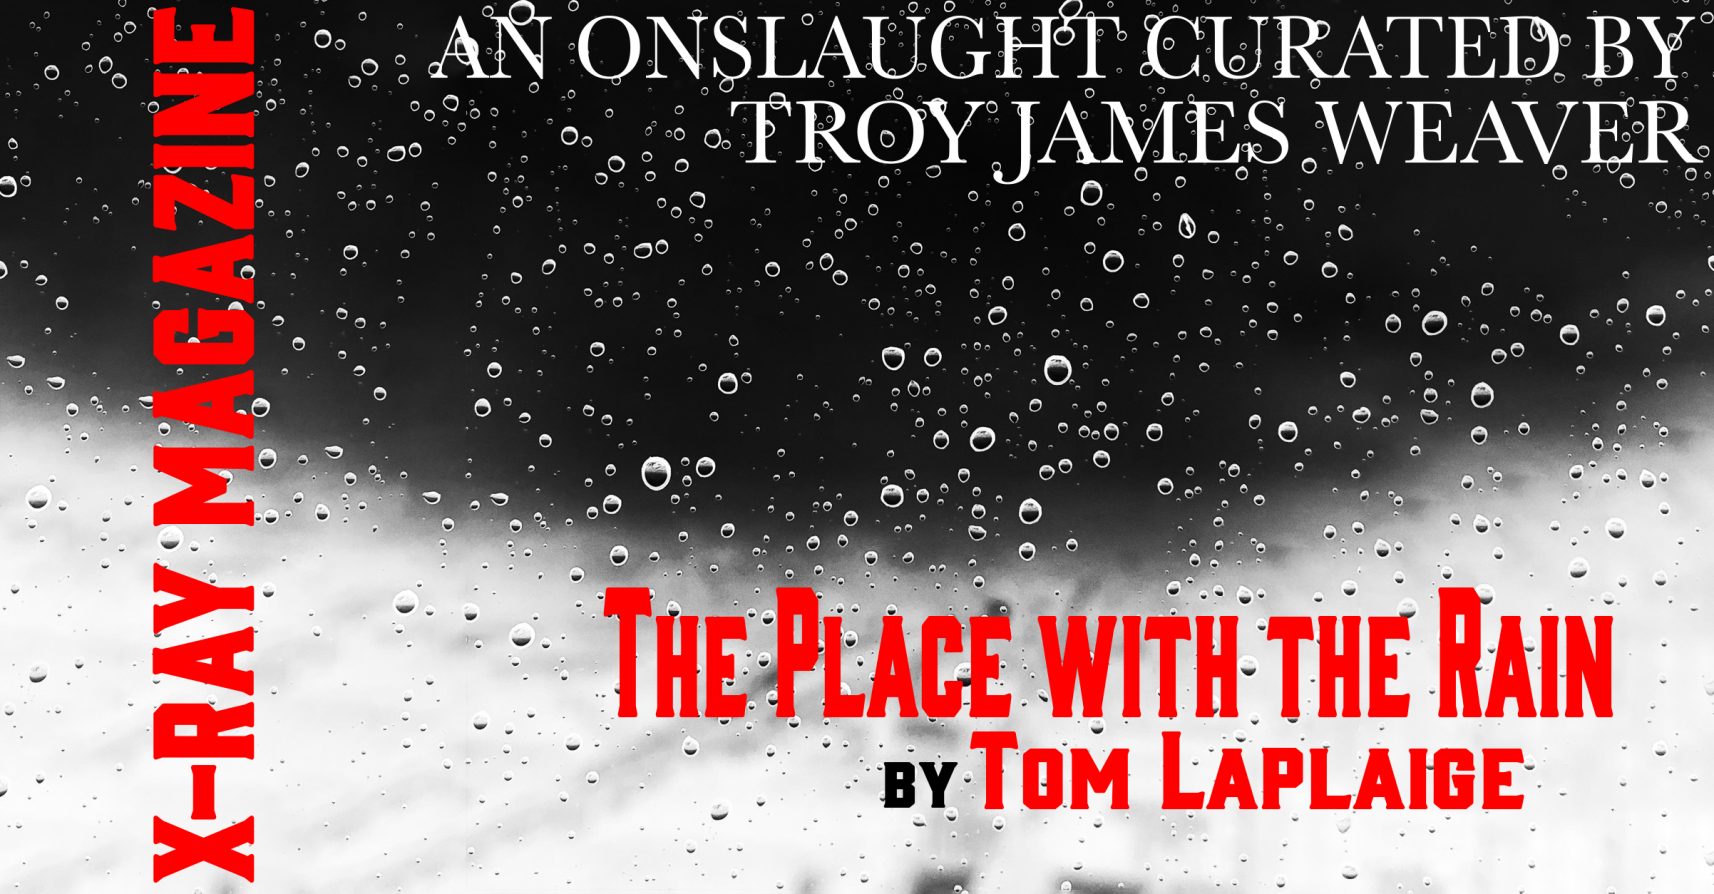 THE PLACE WITH THE RAIN by Tom Laplaige